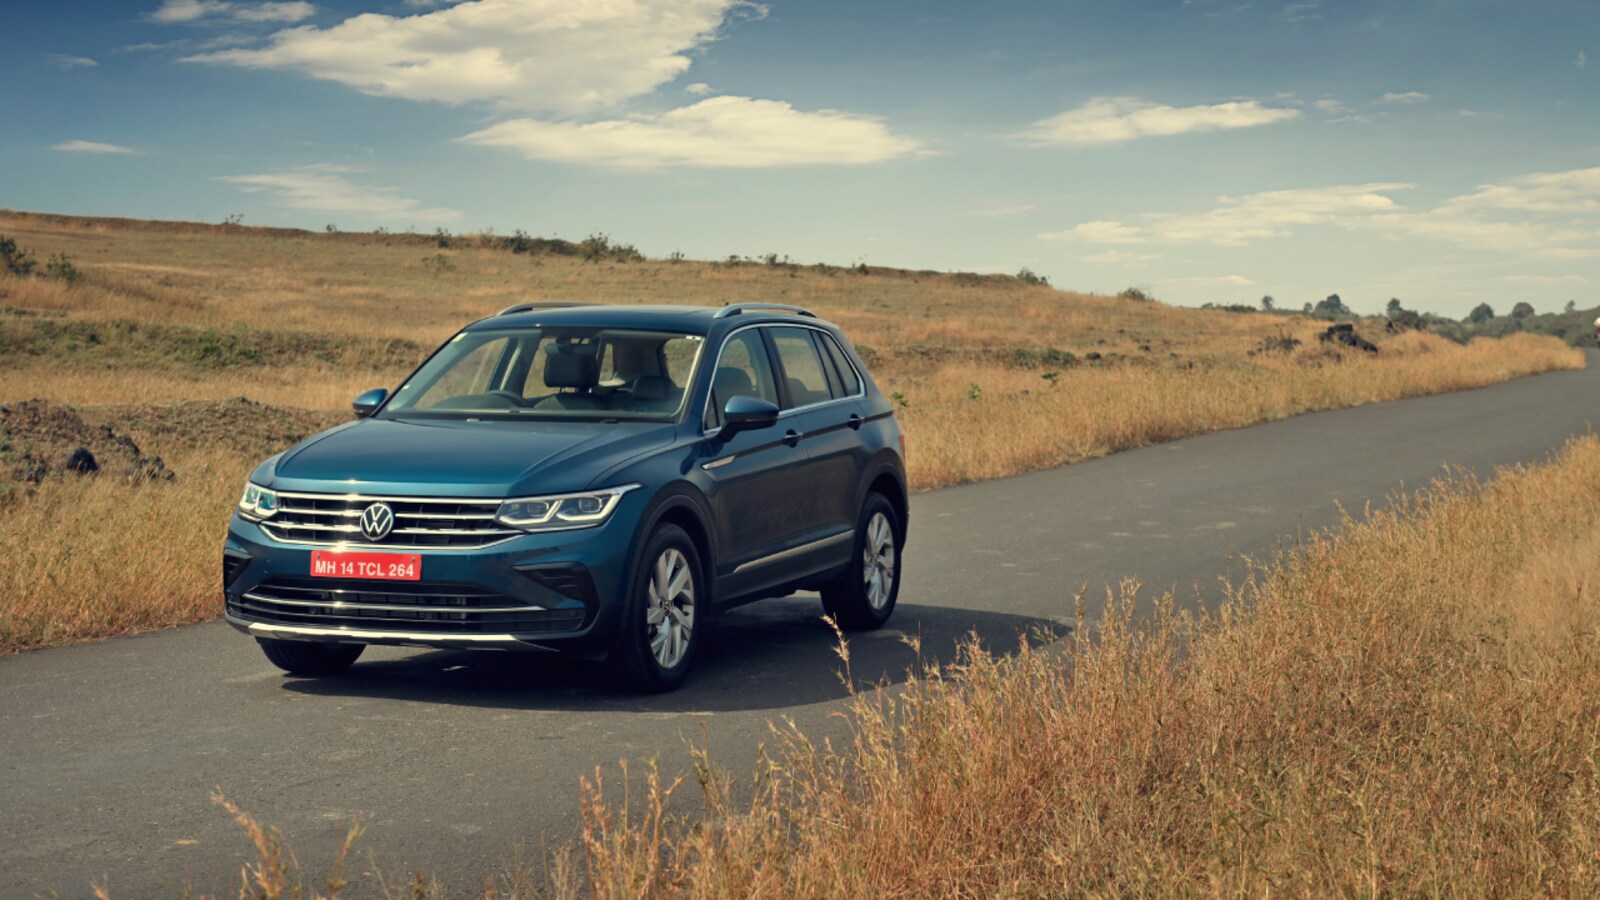 https://images.moneycontrol.com/static-mcnews/2022/04/VW-Tiguan.jpg?impolicy=website&width=1600&height=900